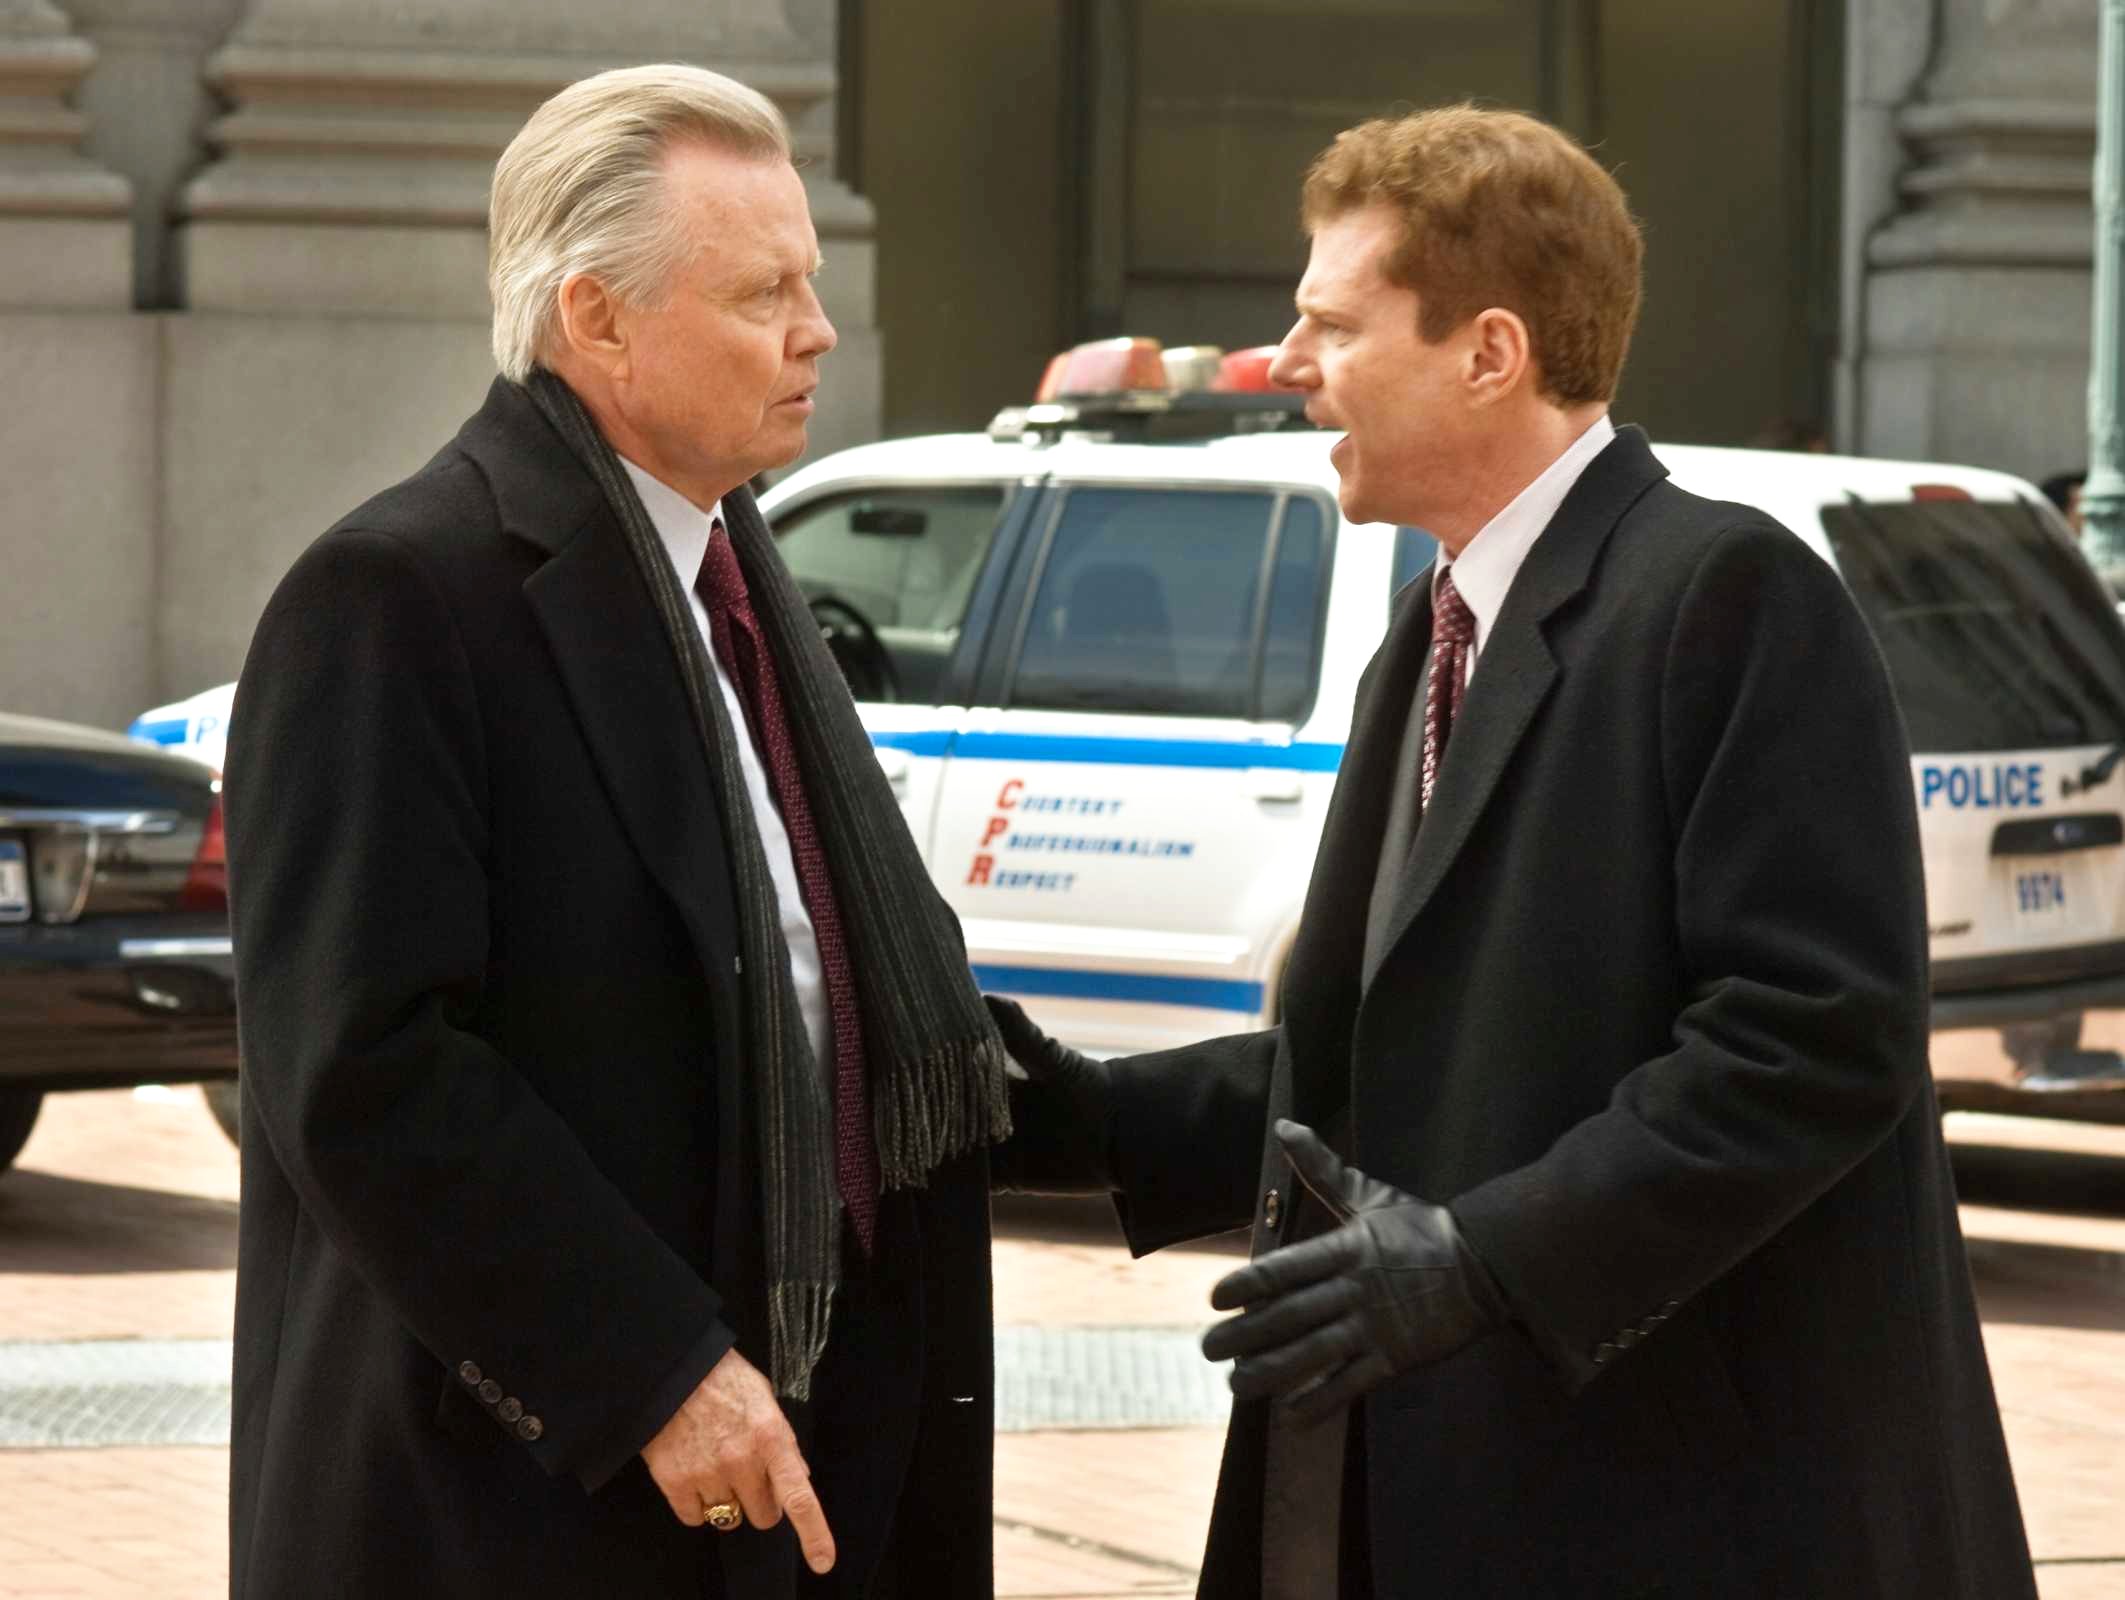 Jon Voight stars as Francis Tierney, Sr. and Noah Emmerich stars as Francis Tierney, Jr. in New Line Cinema's Pride and Glory (2008). Photo credit by Glen Wilson.